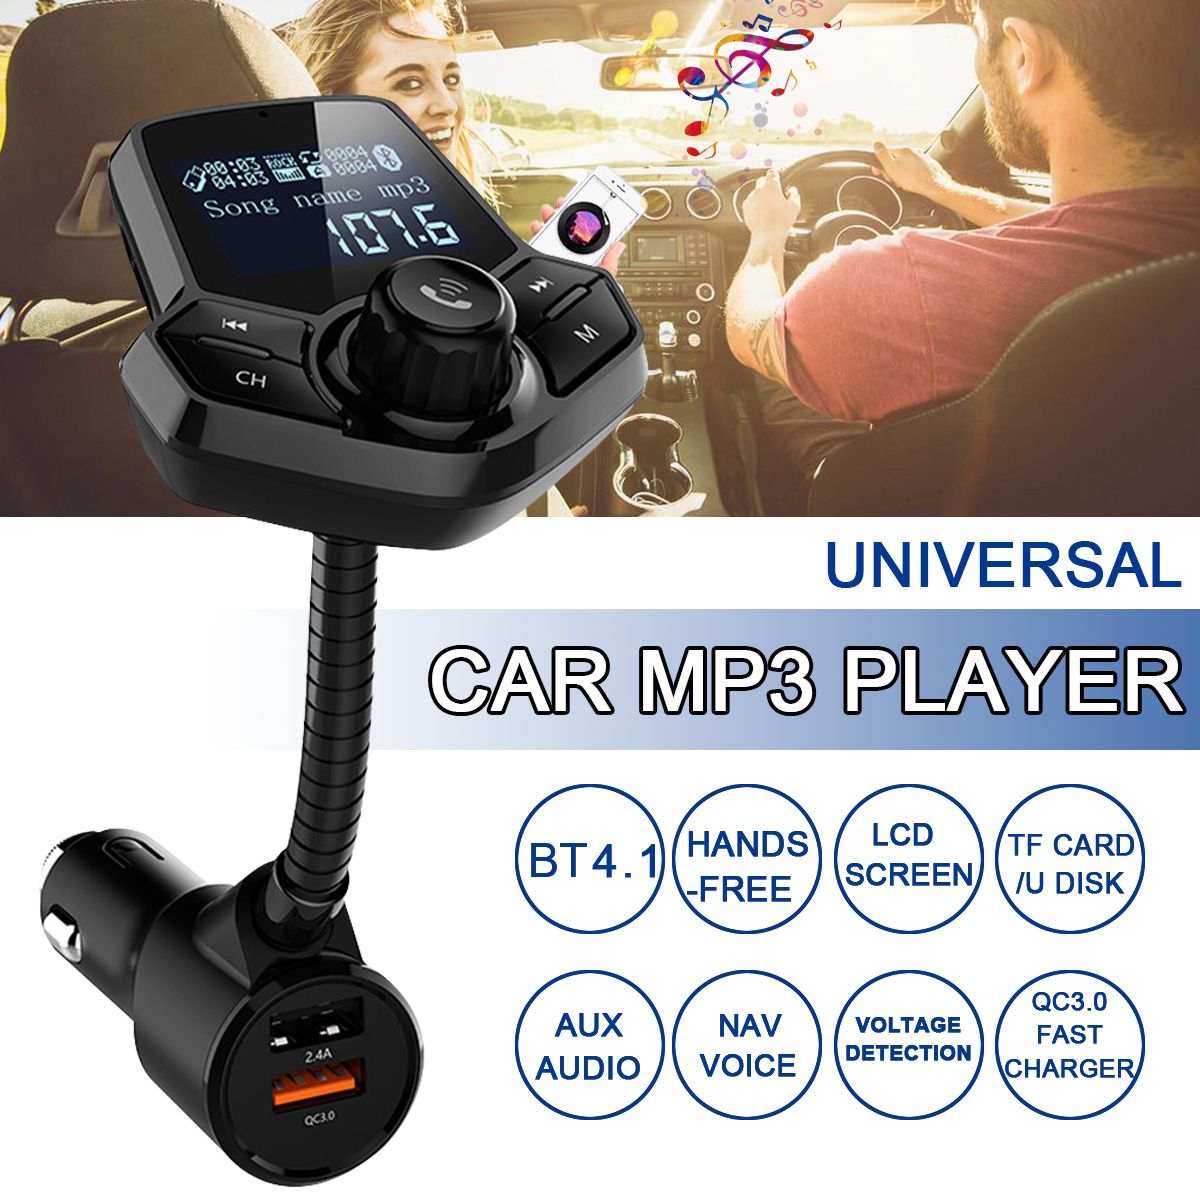 Car-MP3-Player-bluetooth-41-LCD-Screen-Display-With-QC30-Charger-FM-Hands-free-AUX-TF-Card-U-Disk-Un-1632587